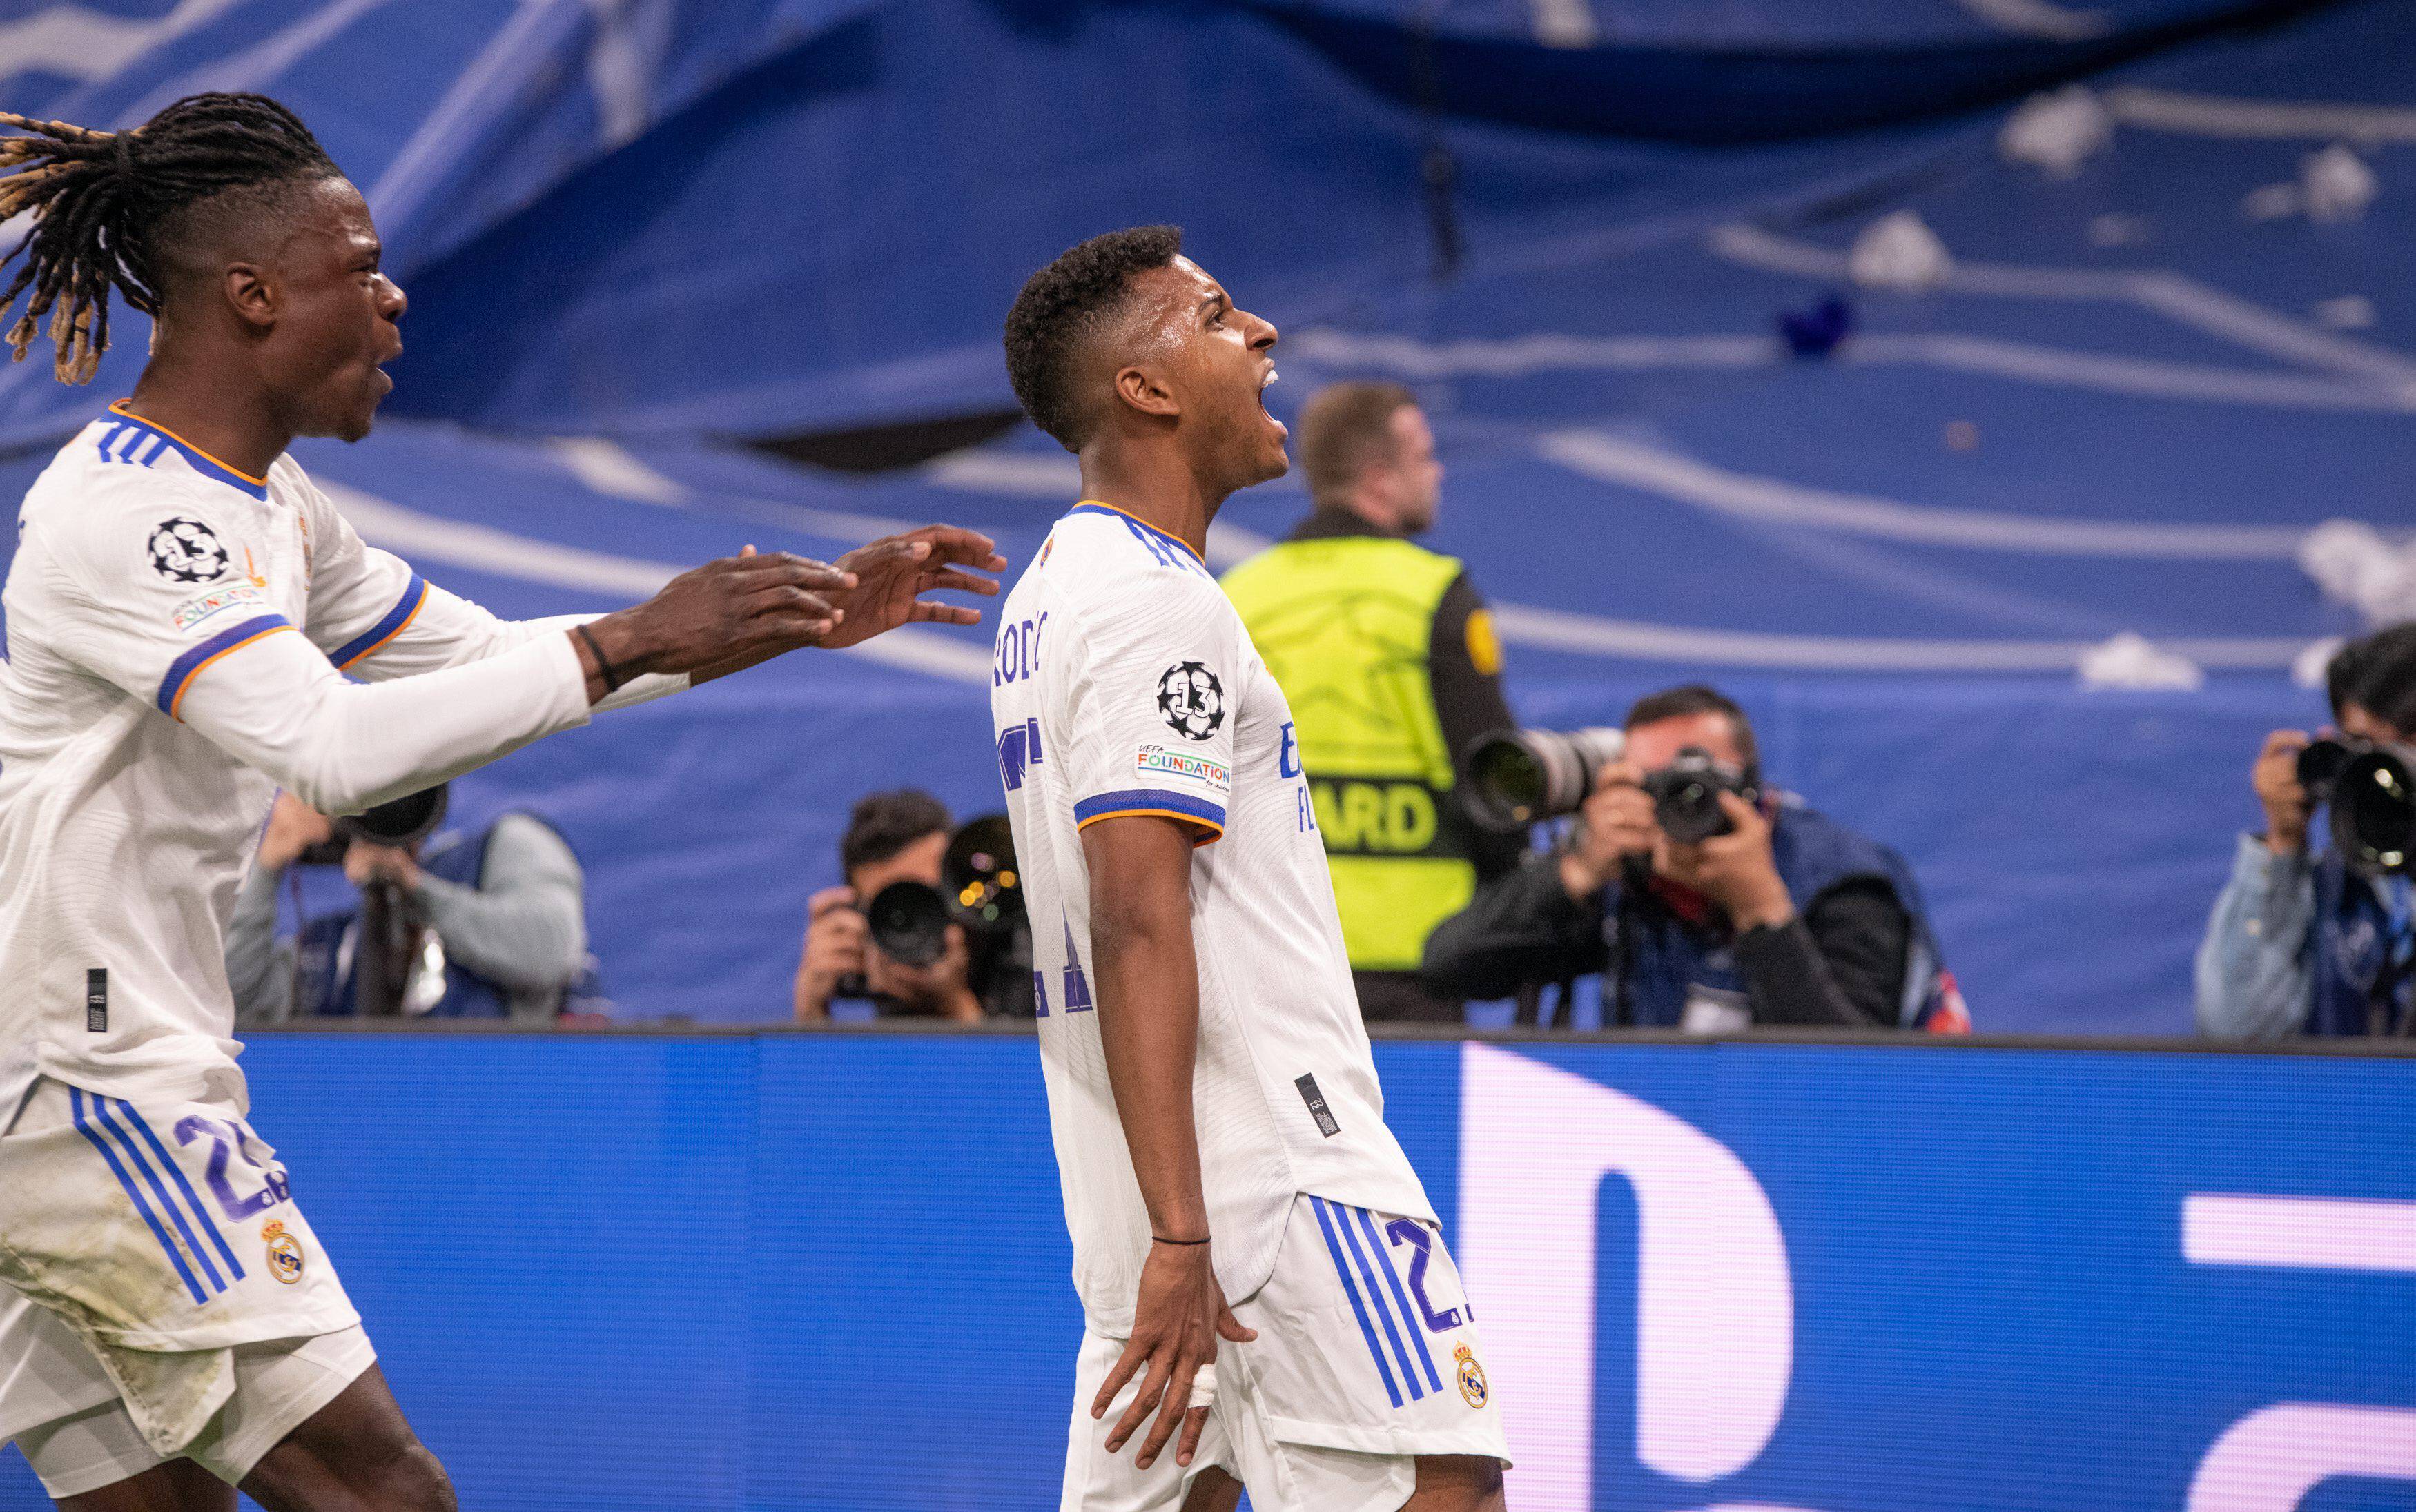 A quickfire brace from Rodrygo was enough to force the game into extra time